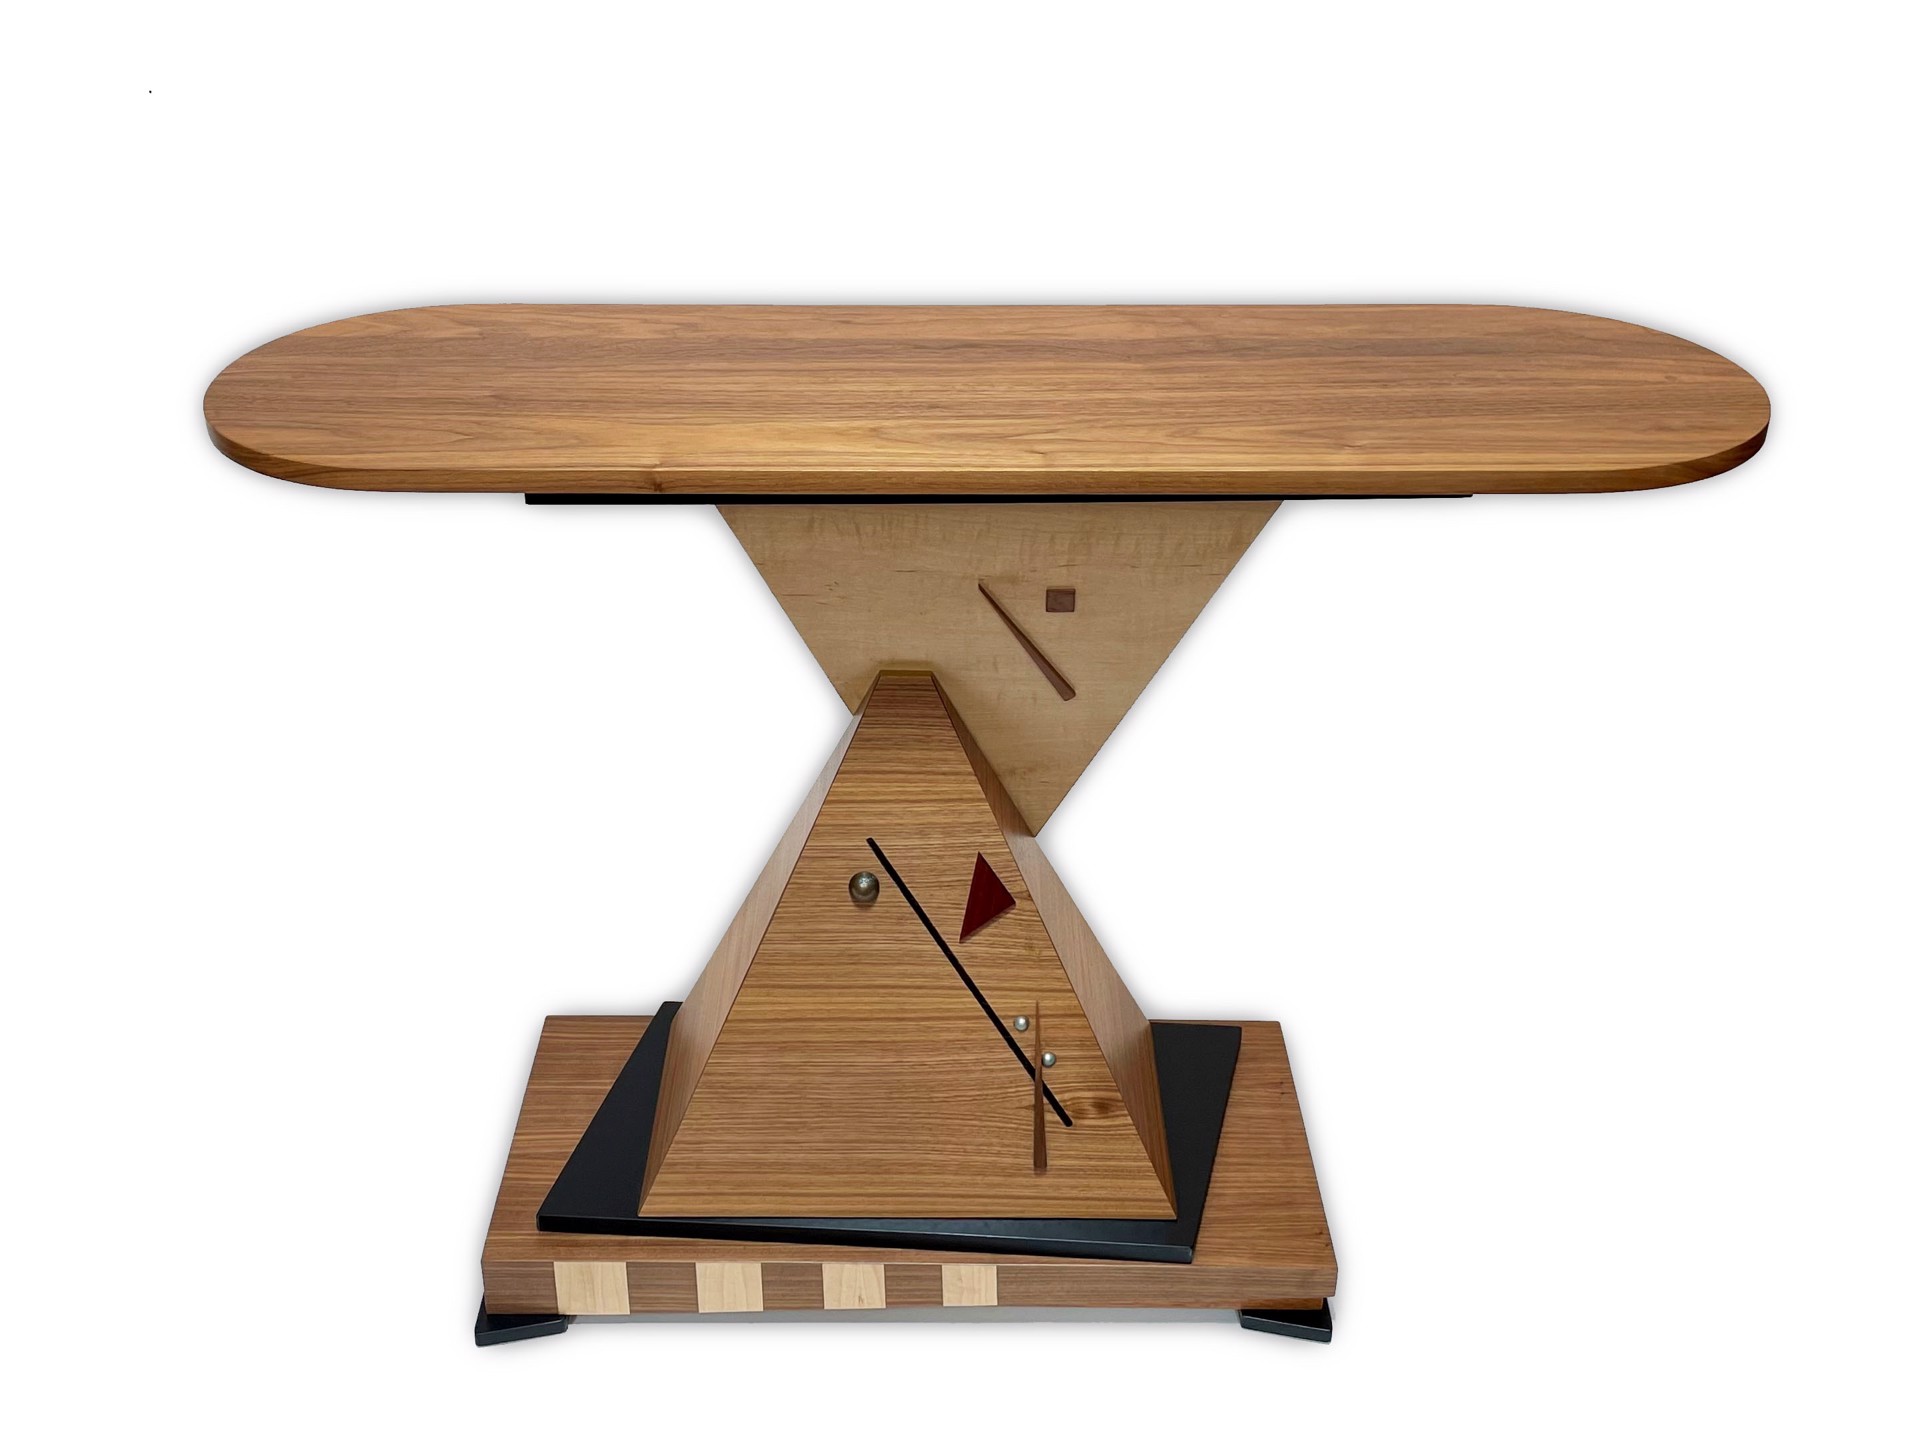 Balanced Angles Table~ Solid Walnut Top with Walnut, Blood Wood & Curly Maple Veneers by Joseph Nikrasch